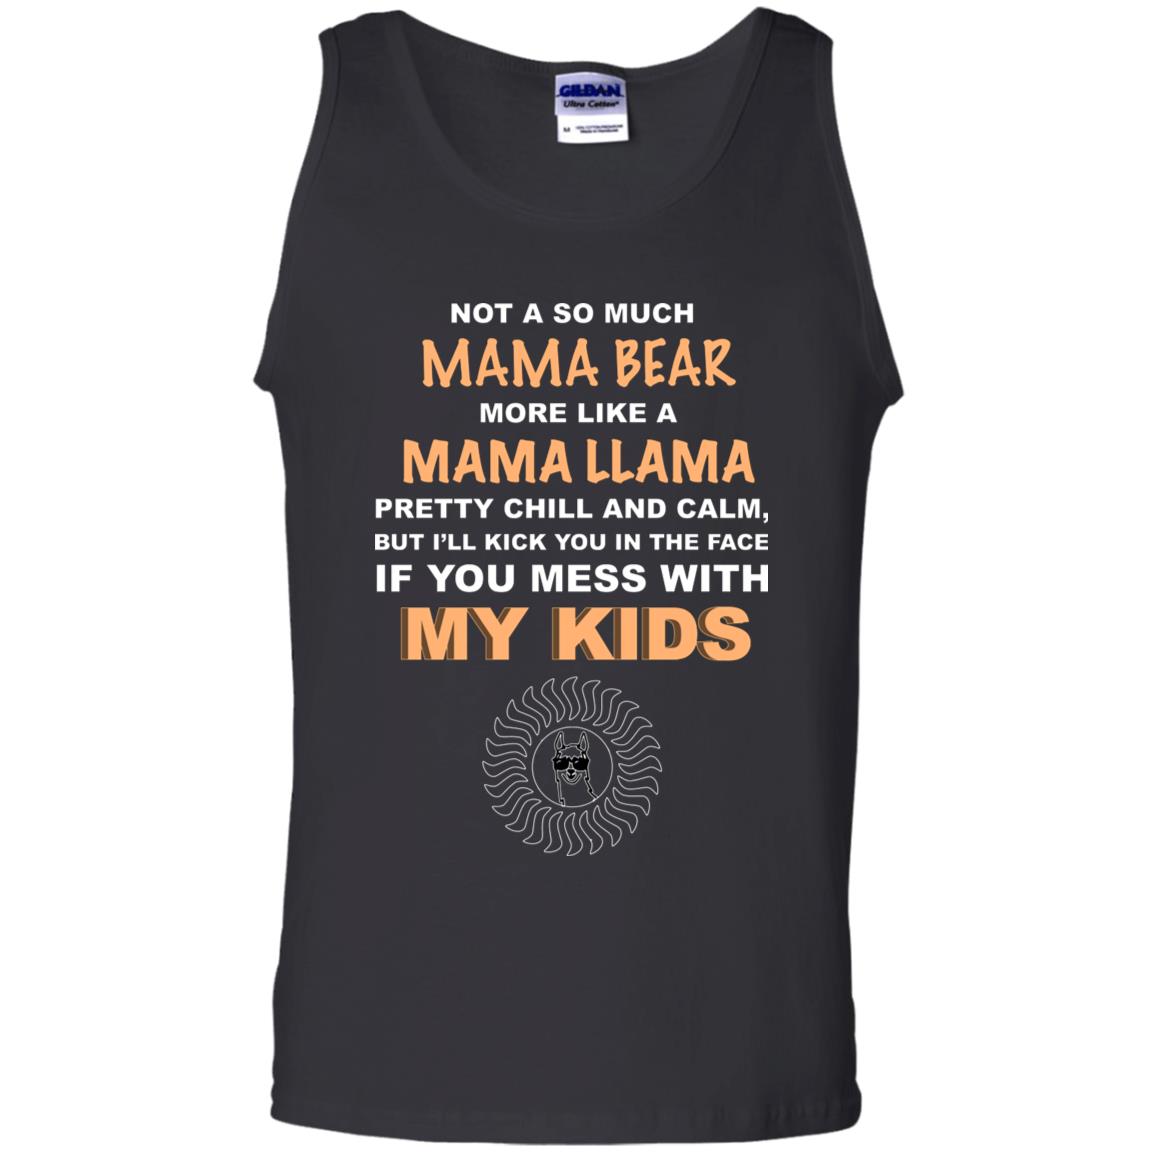 Mama Bear More Like Mama Llama Pretty Chill And Calm But I'll Kicj You In The Face If You Mess With My KidsG220 Gildan 100% Cotton Tank Top